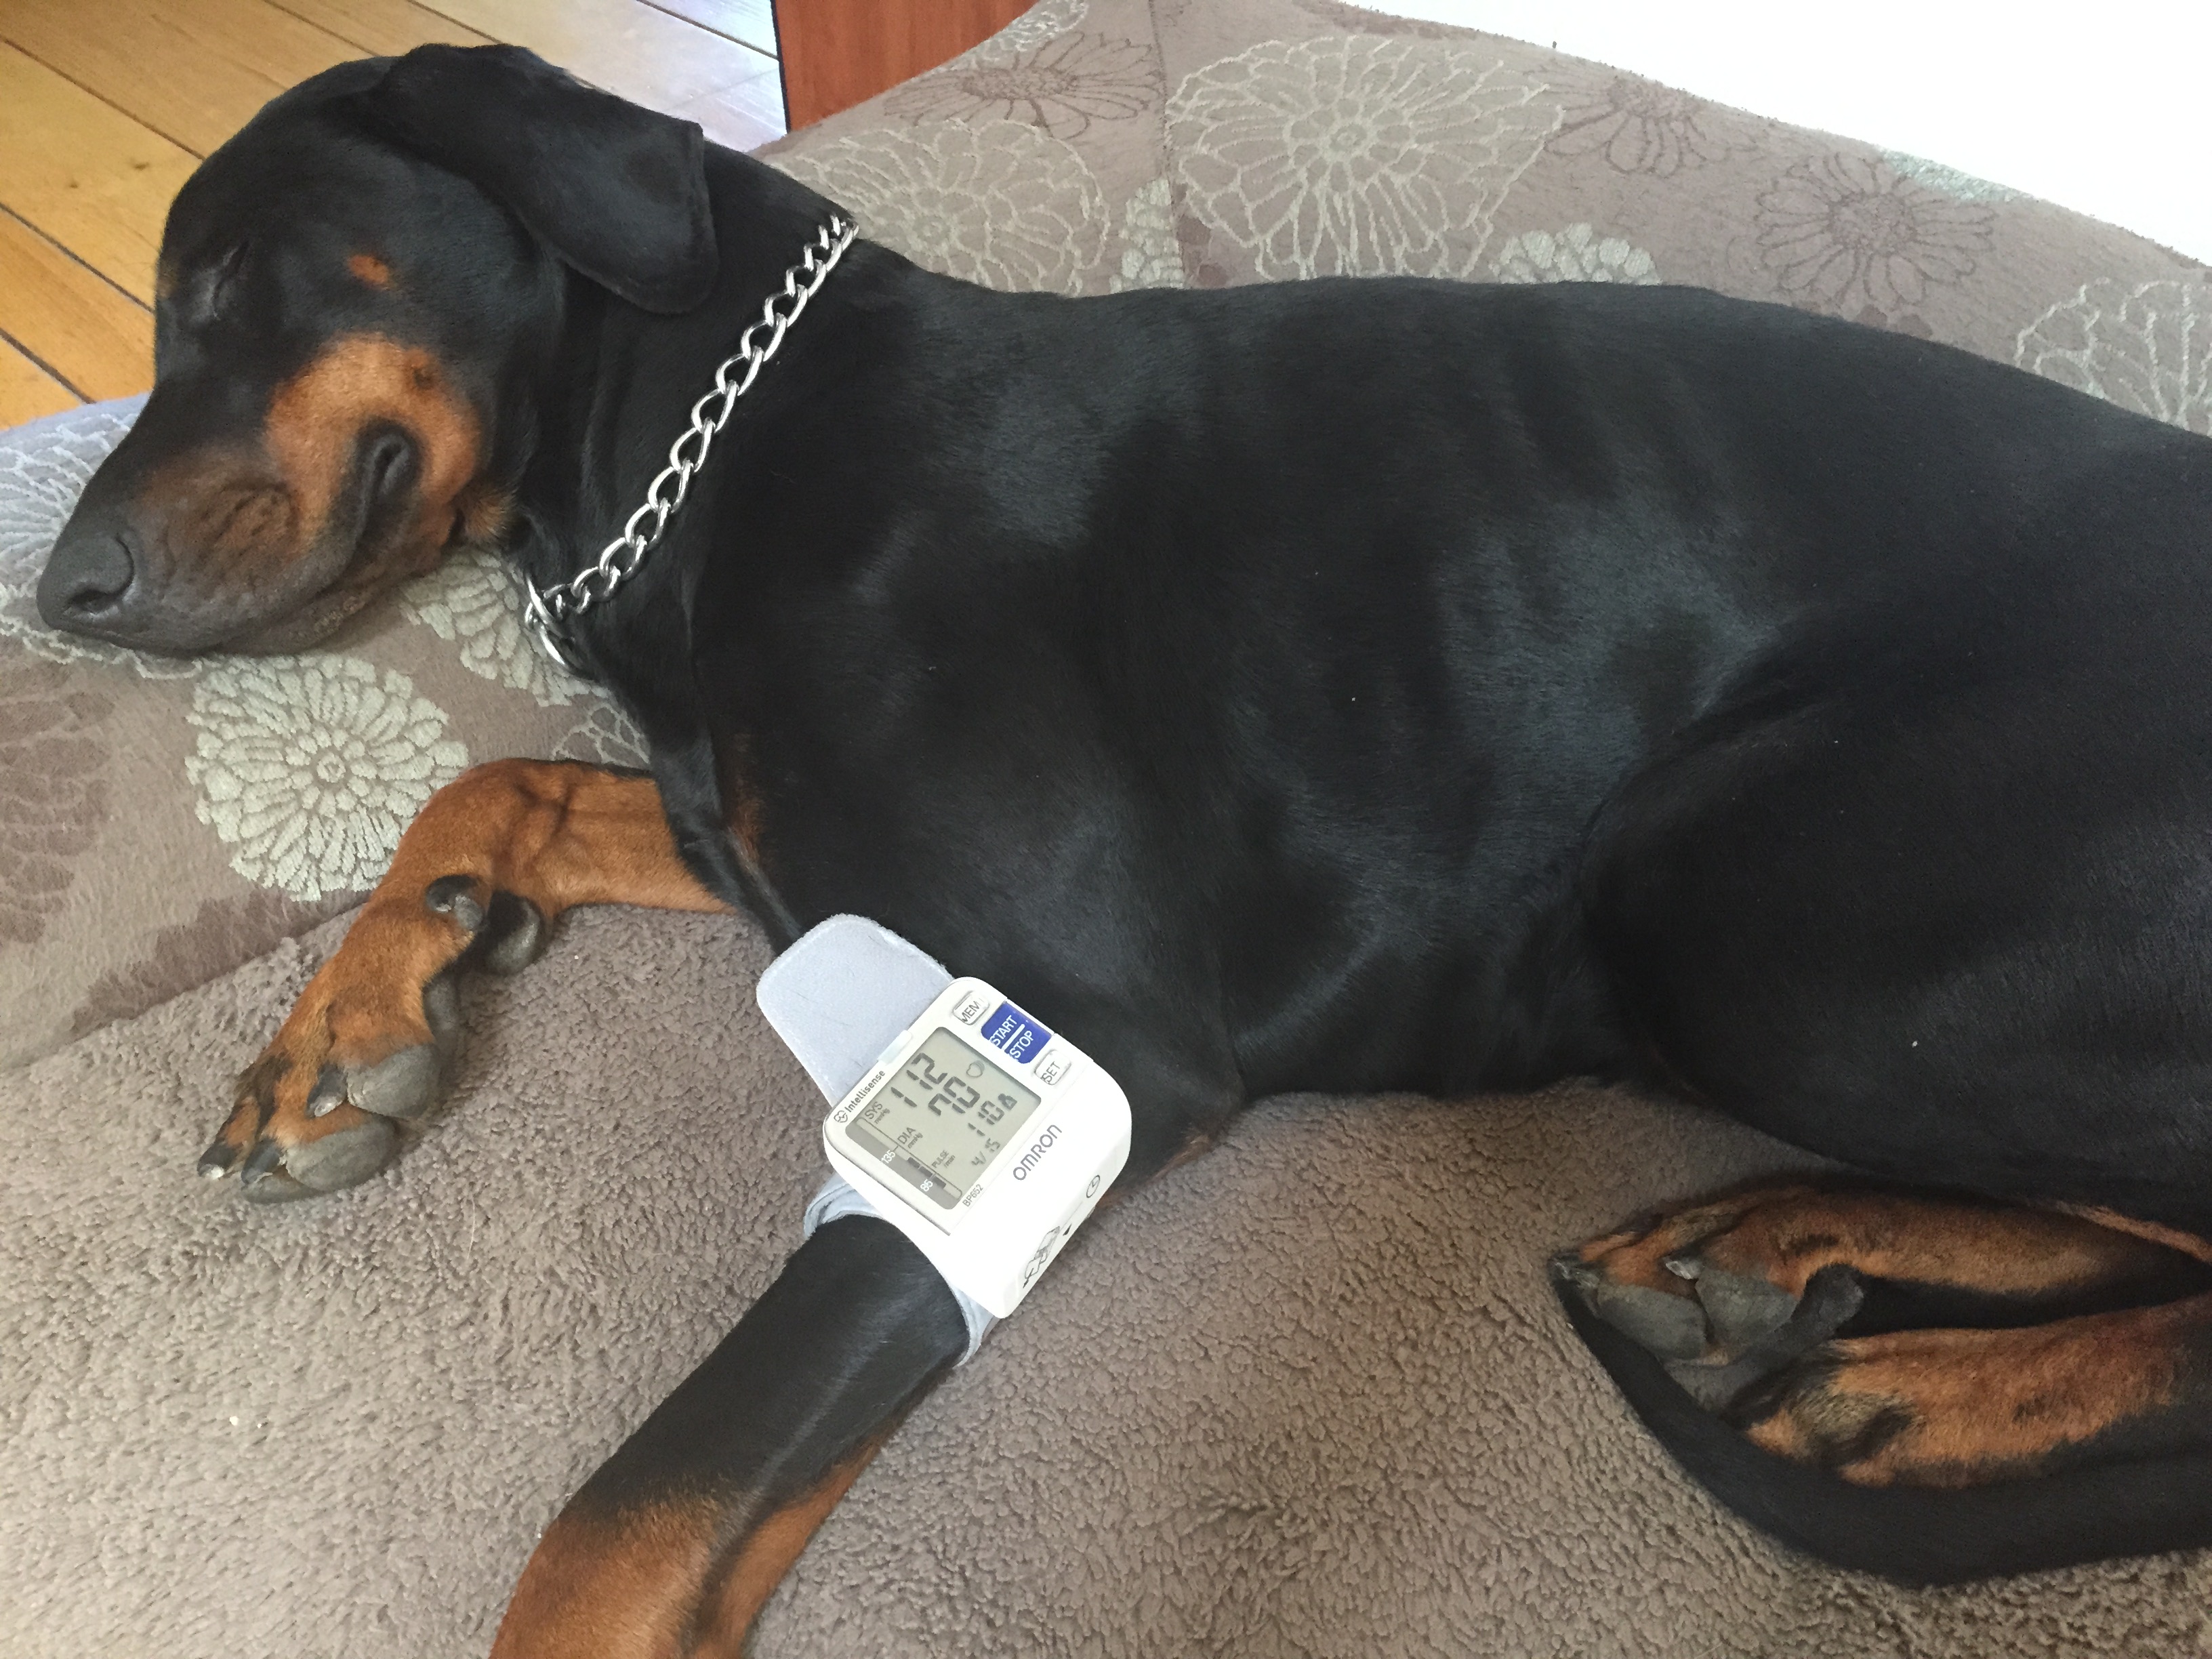 Can you measure a dog's blood pressure with a human monitor?